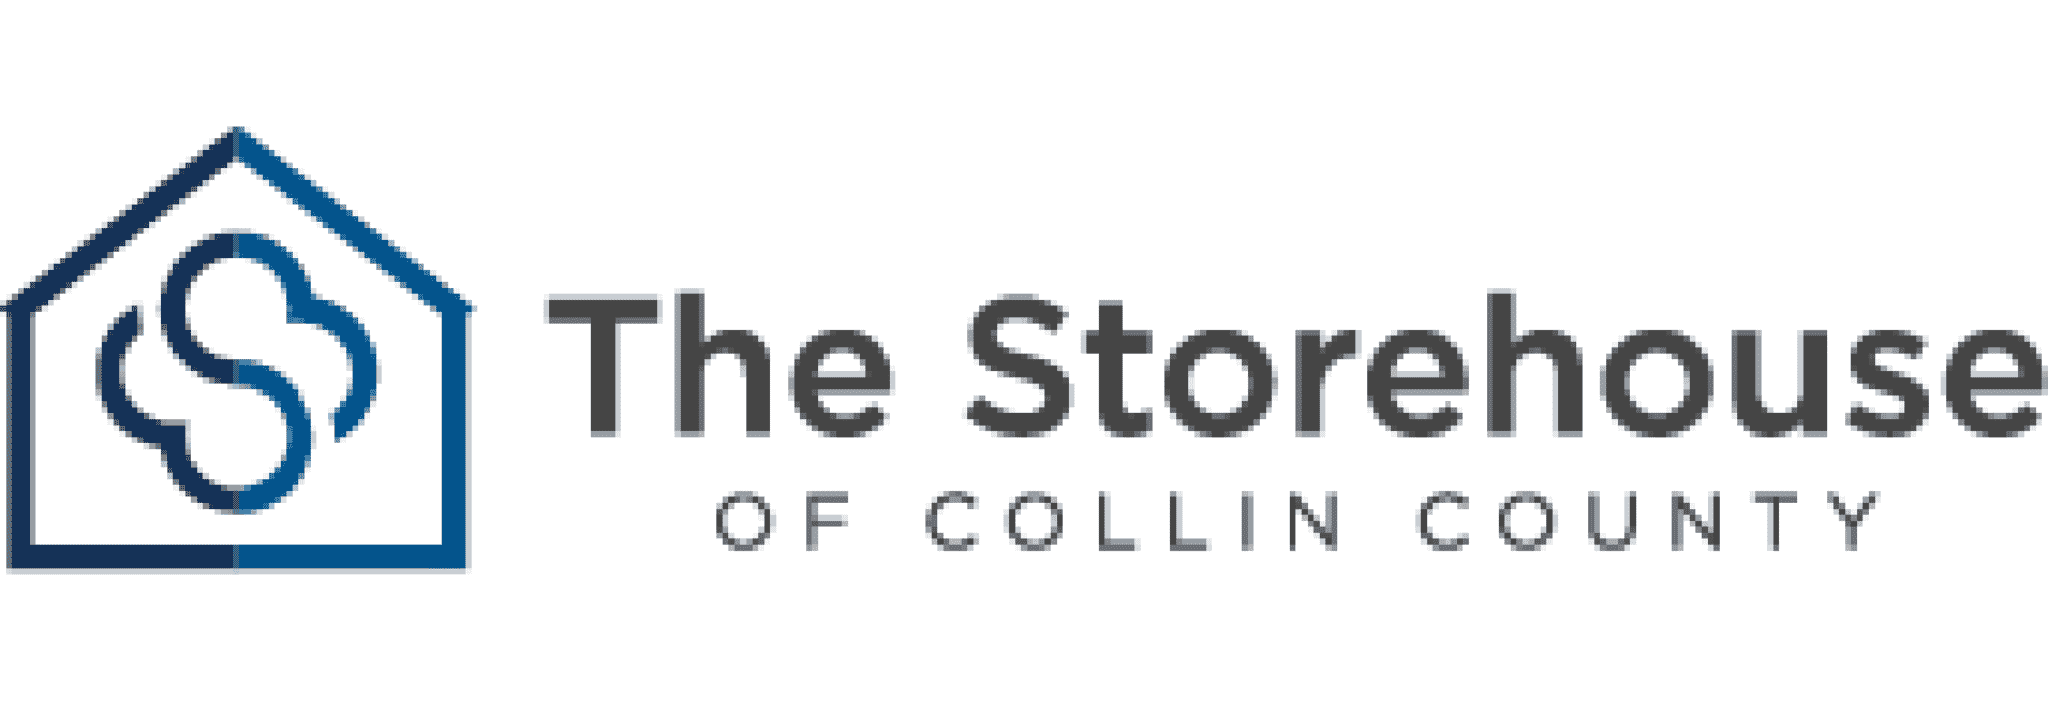 the-storehouse-of-collin-county